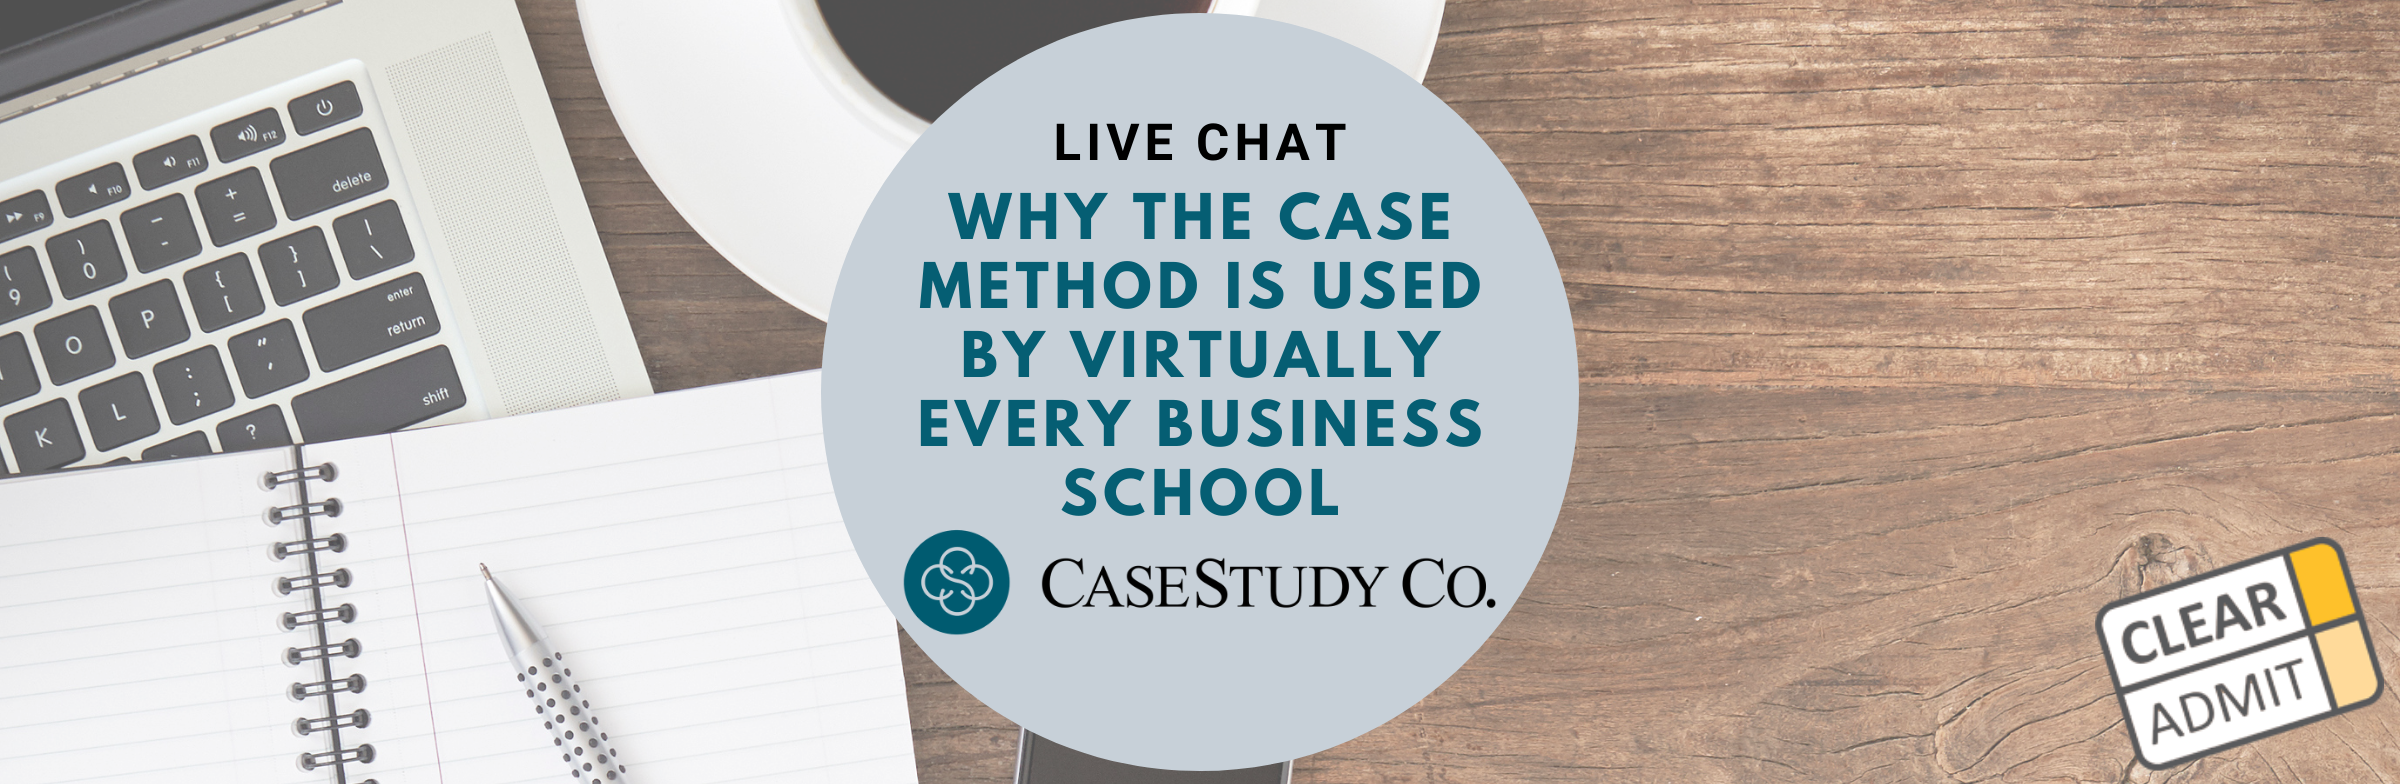 Image for Upcoming Live Chat: Why the Case Method is Used by Virtually Every Business School